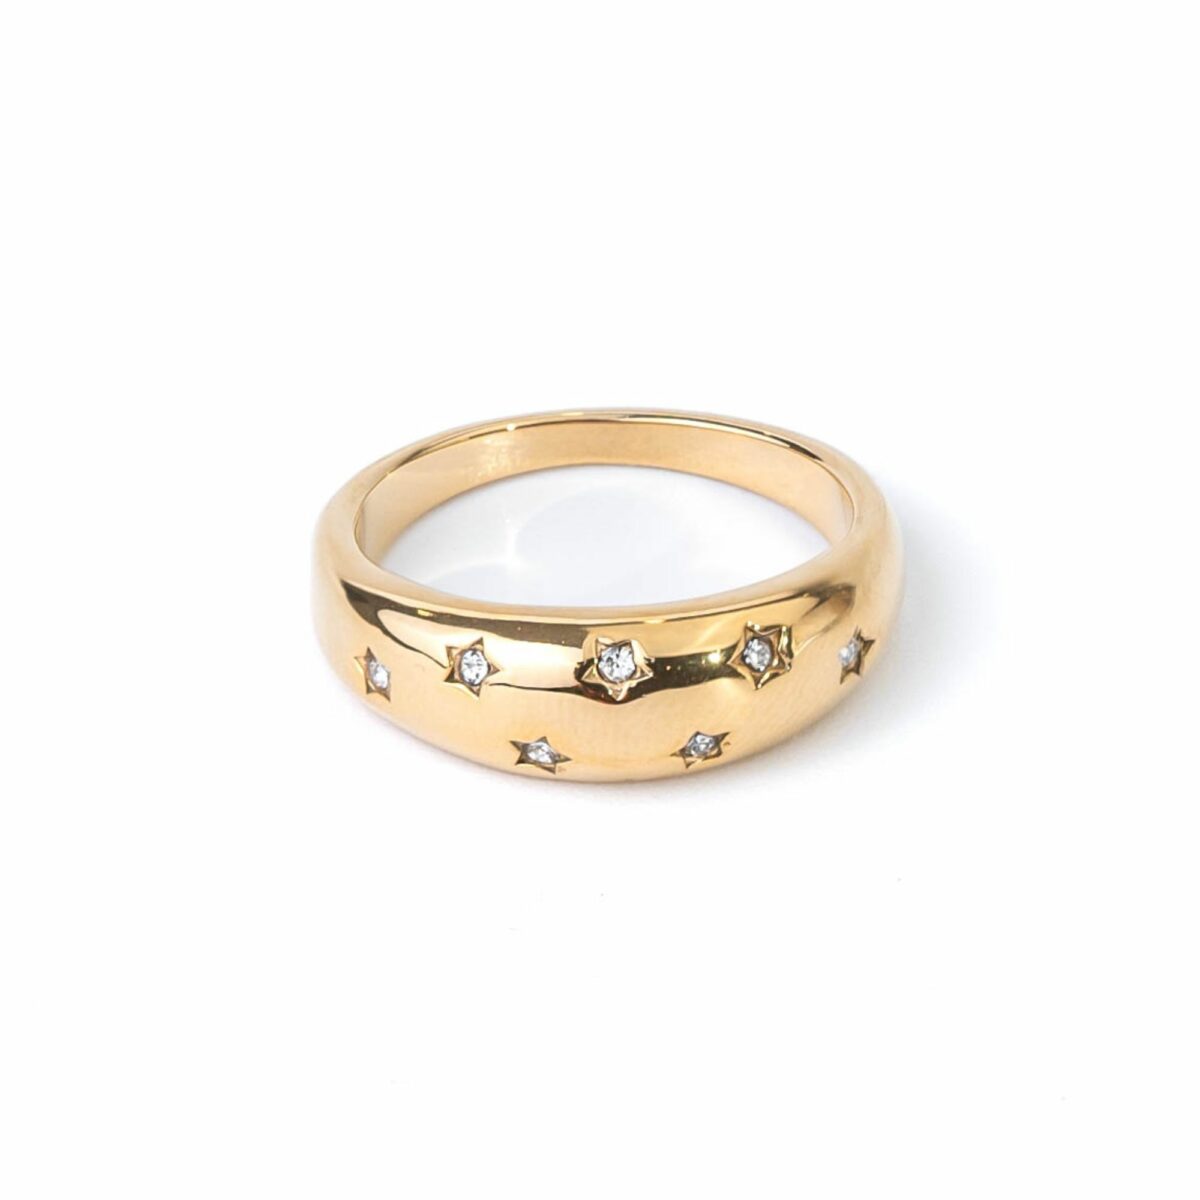 https://m.clubbella.co/product/18k-gold-plated-sparkles-ring/ DSC00391-Edit-2-2